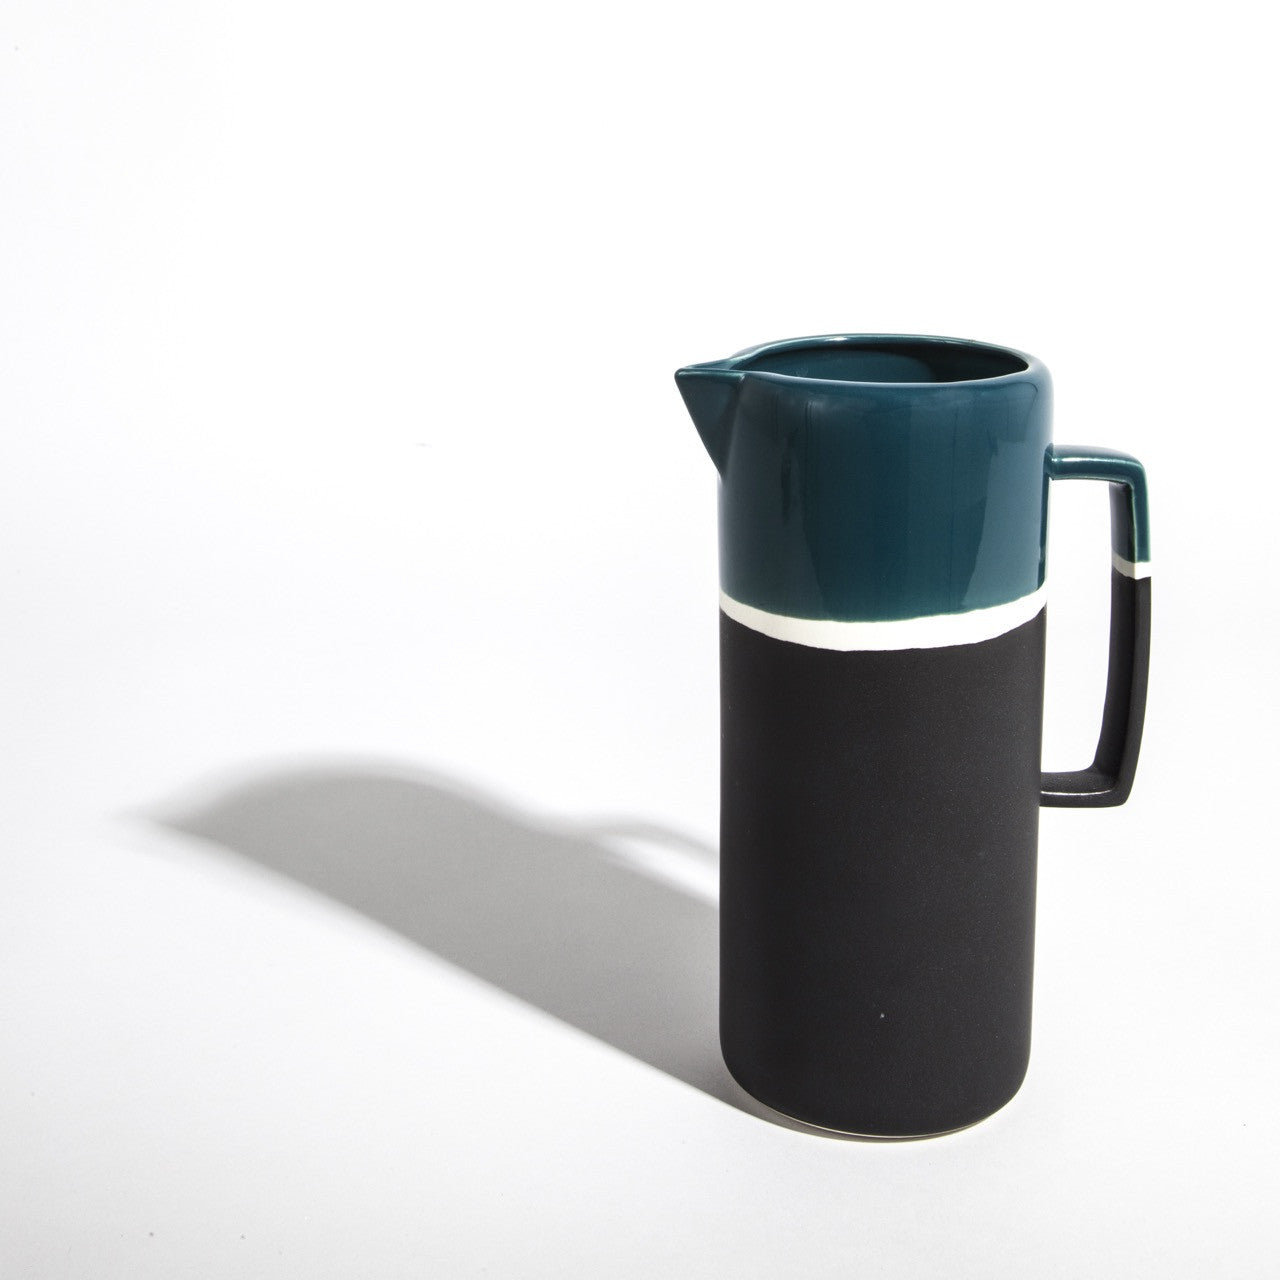 Graphic lines, deep colours and double finish effect matte and shiny, this retro-looking jug has been designed by Maison Sarah Lavoine and handmade traditionally by skilled artisans at Jars Ceramists in southern France. | 